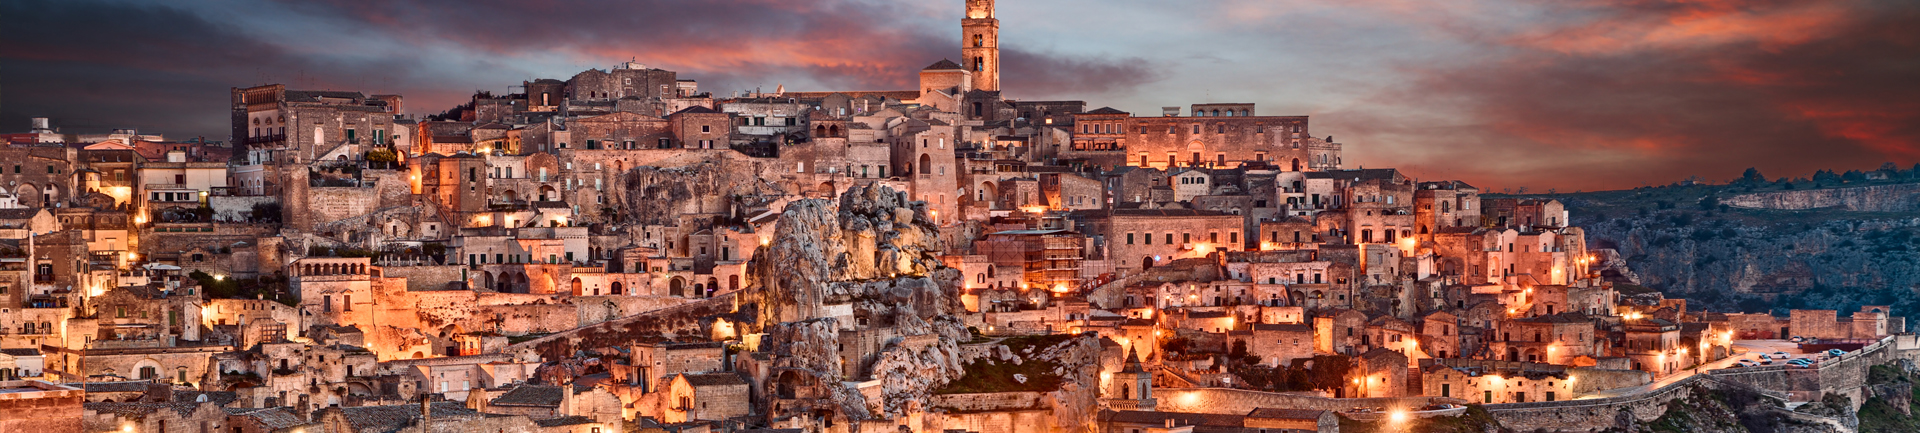 Matera. The city of the Sassi.